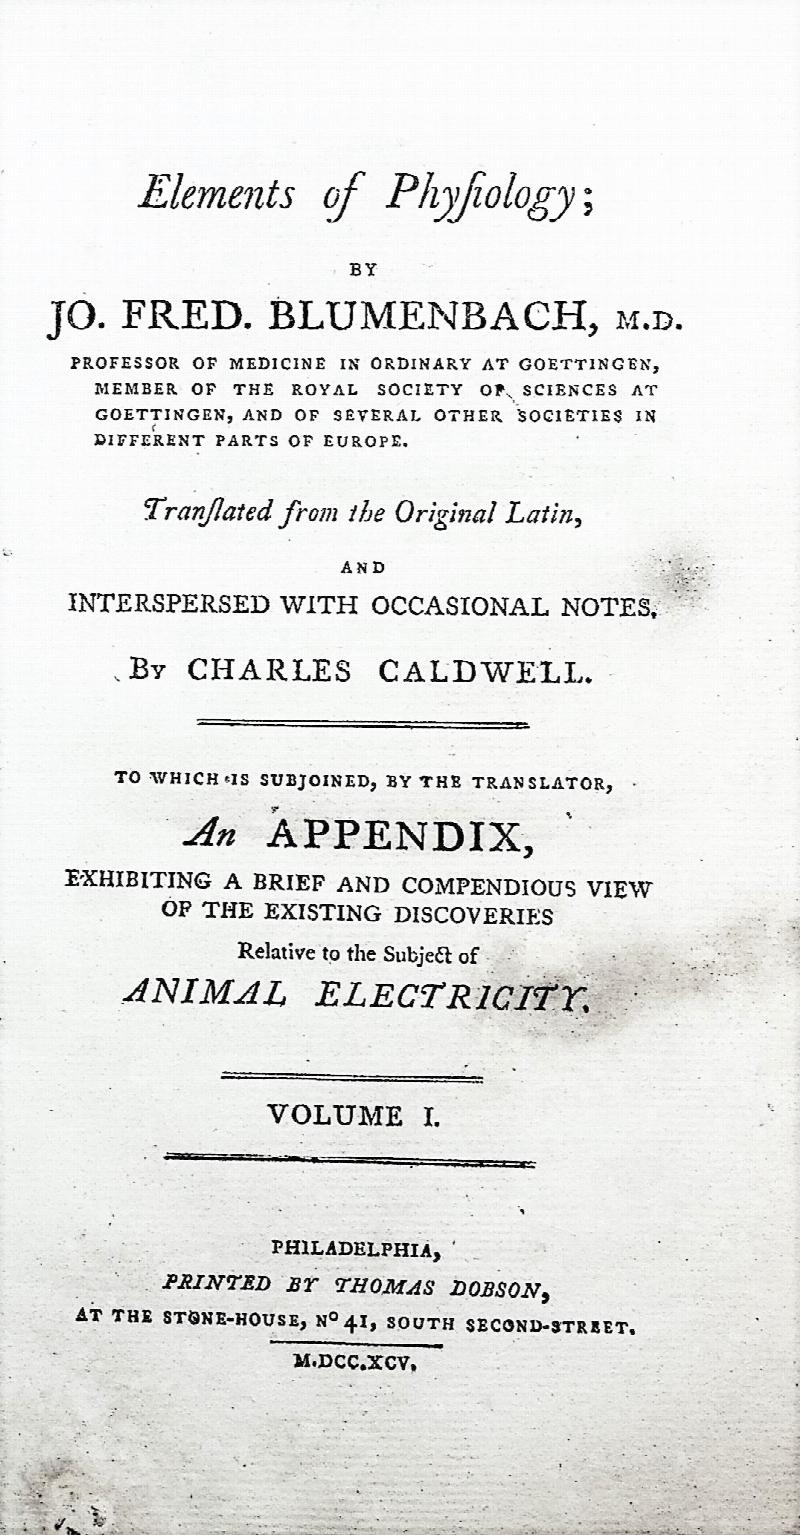 Elements of Physiology translated from the Original Latin and interspersed  with occasional notes by Charles Caldwell, to which is subjoined, by the  translator, An Appendix, exhibiting a brief and compendious view of